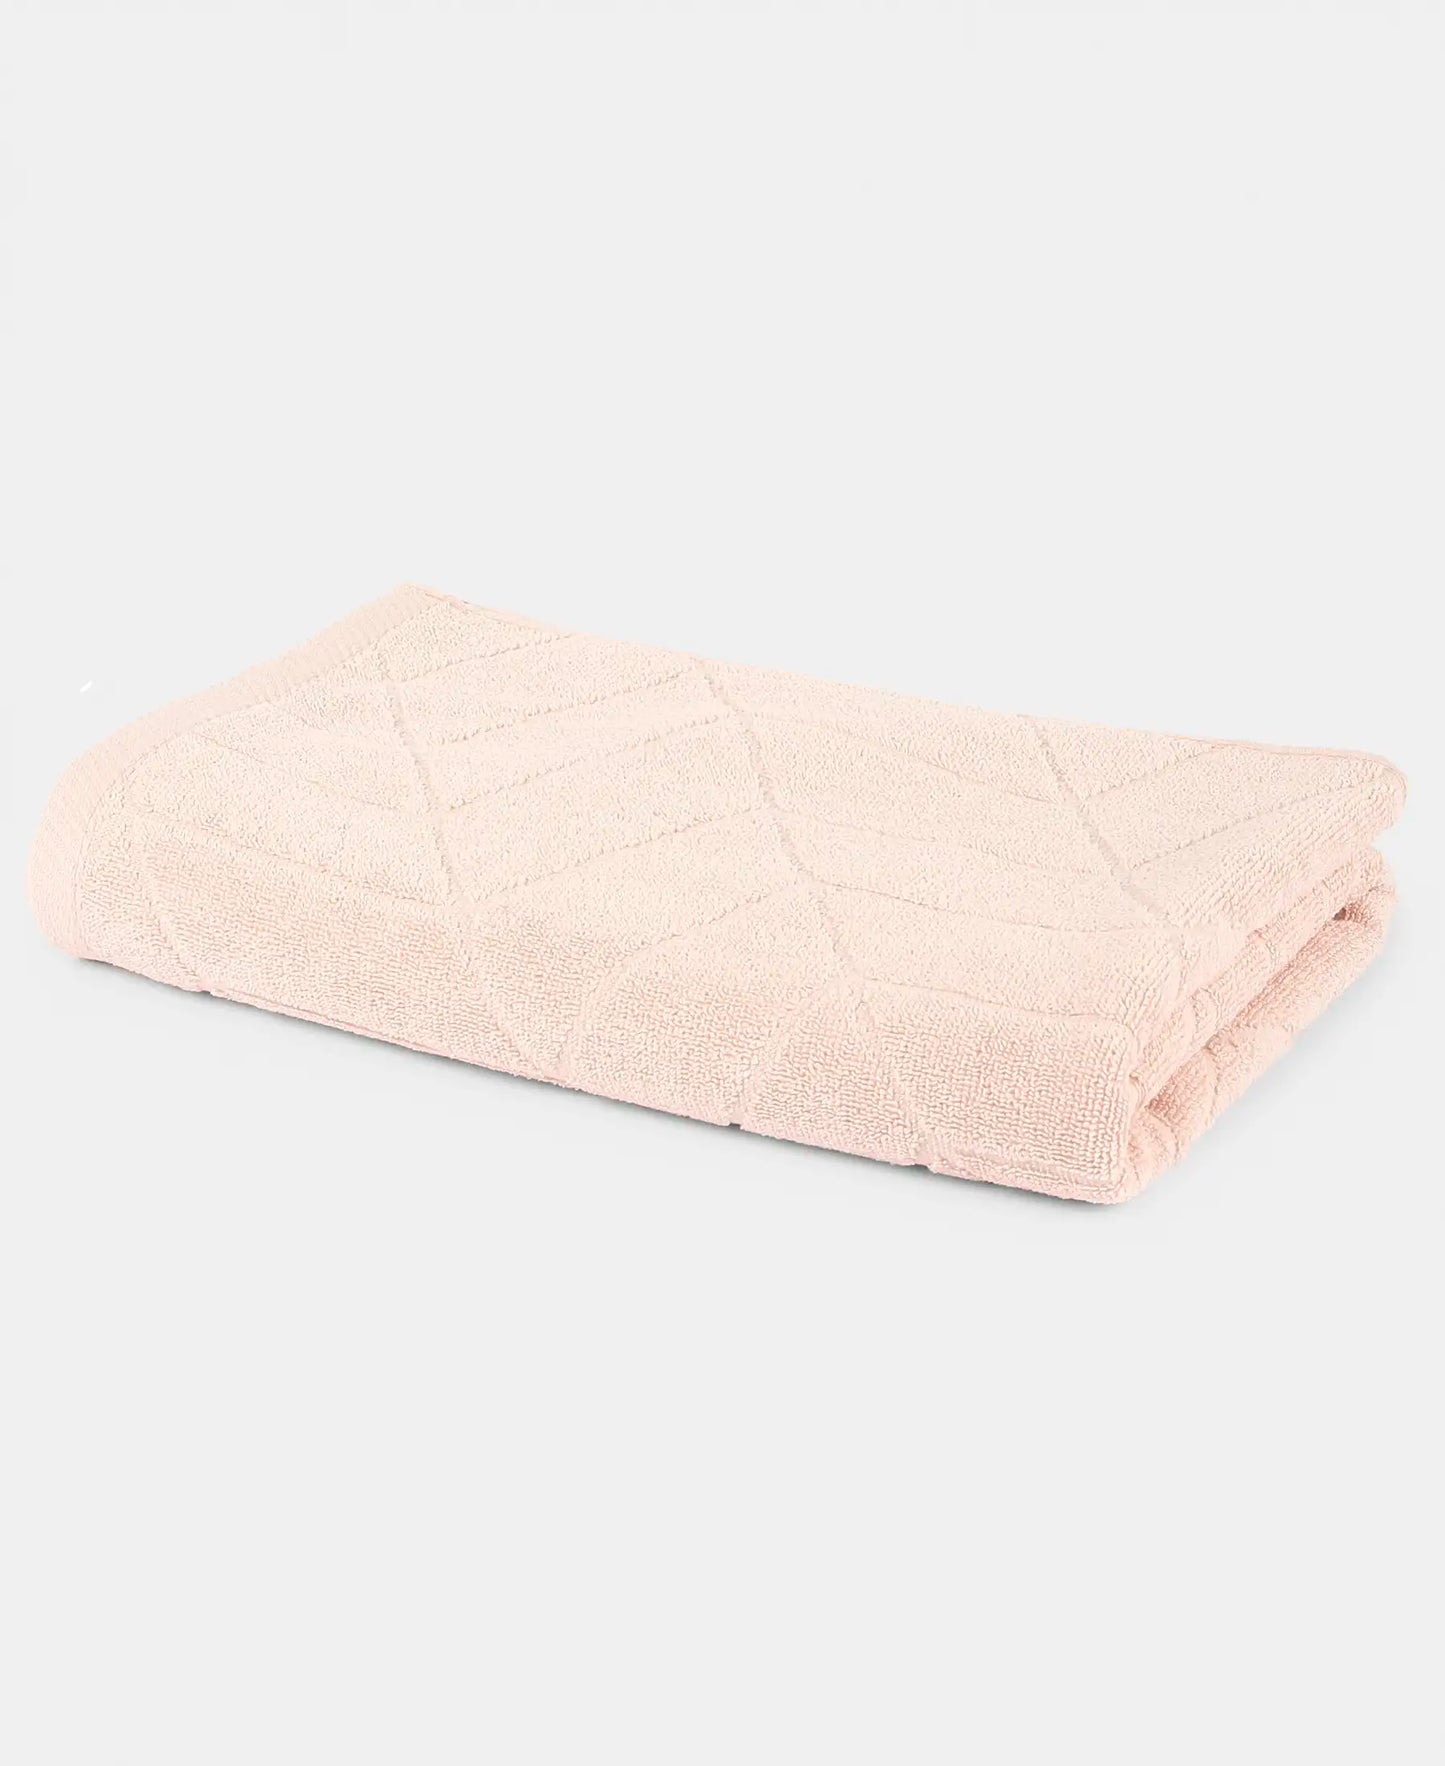 Cotton Terry Ultrasoft and Durable Patterned Bath Towel - Skin